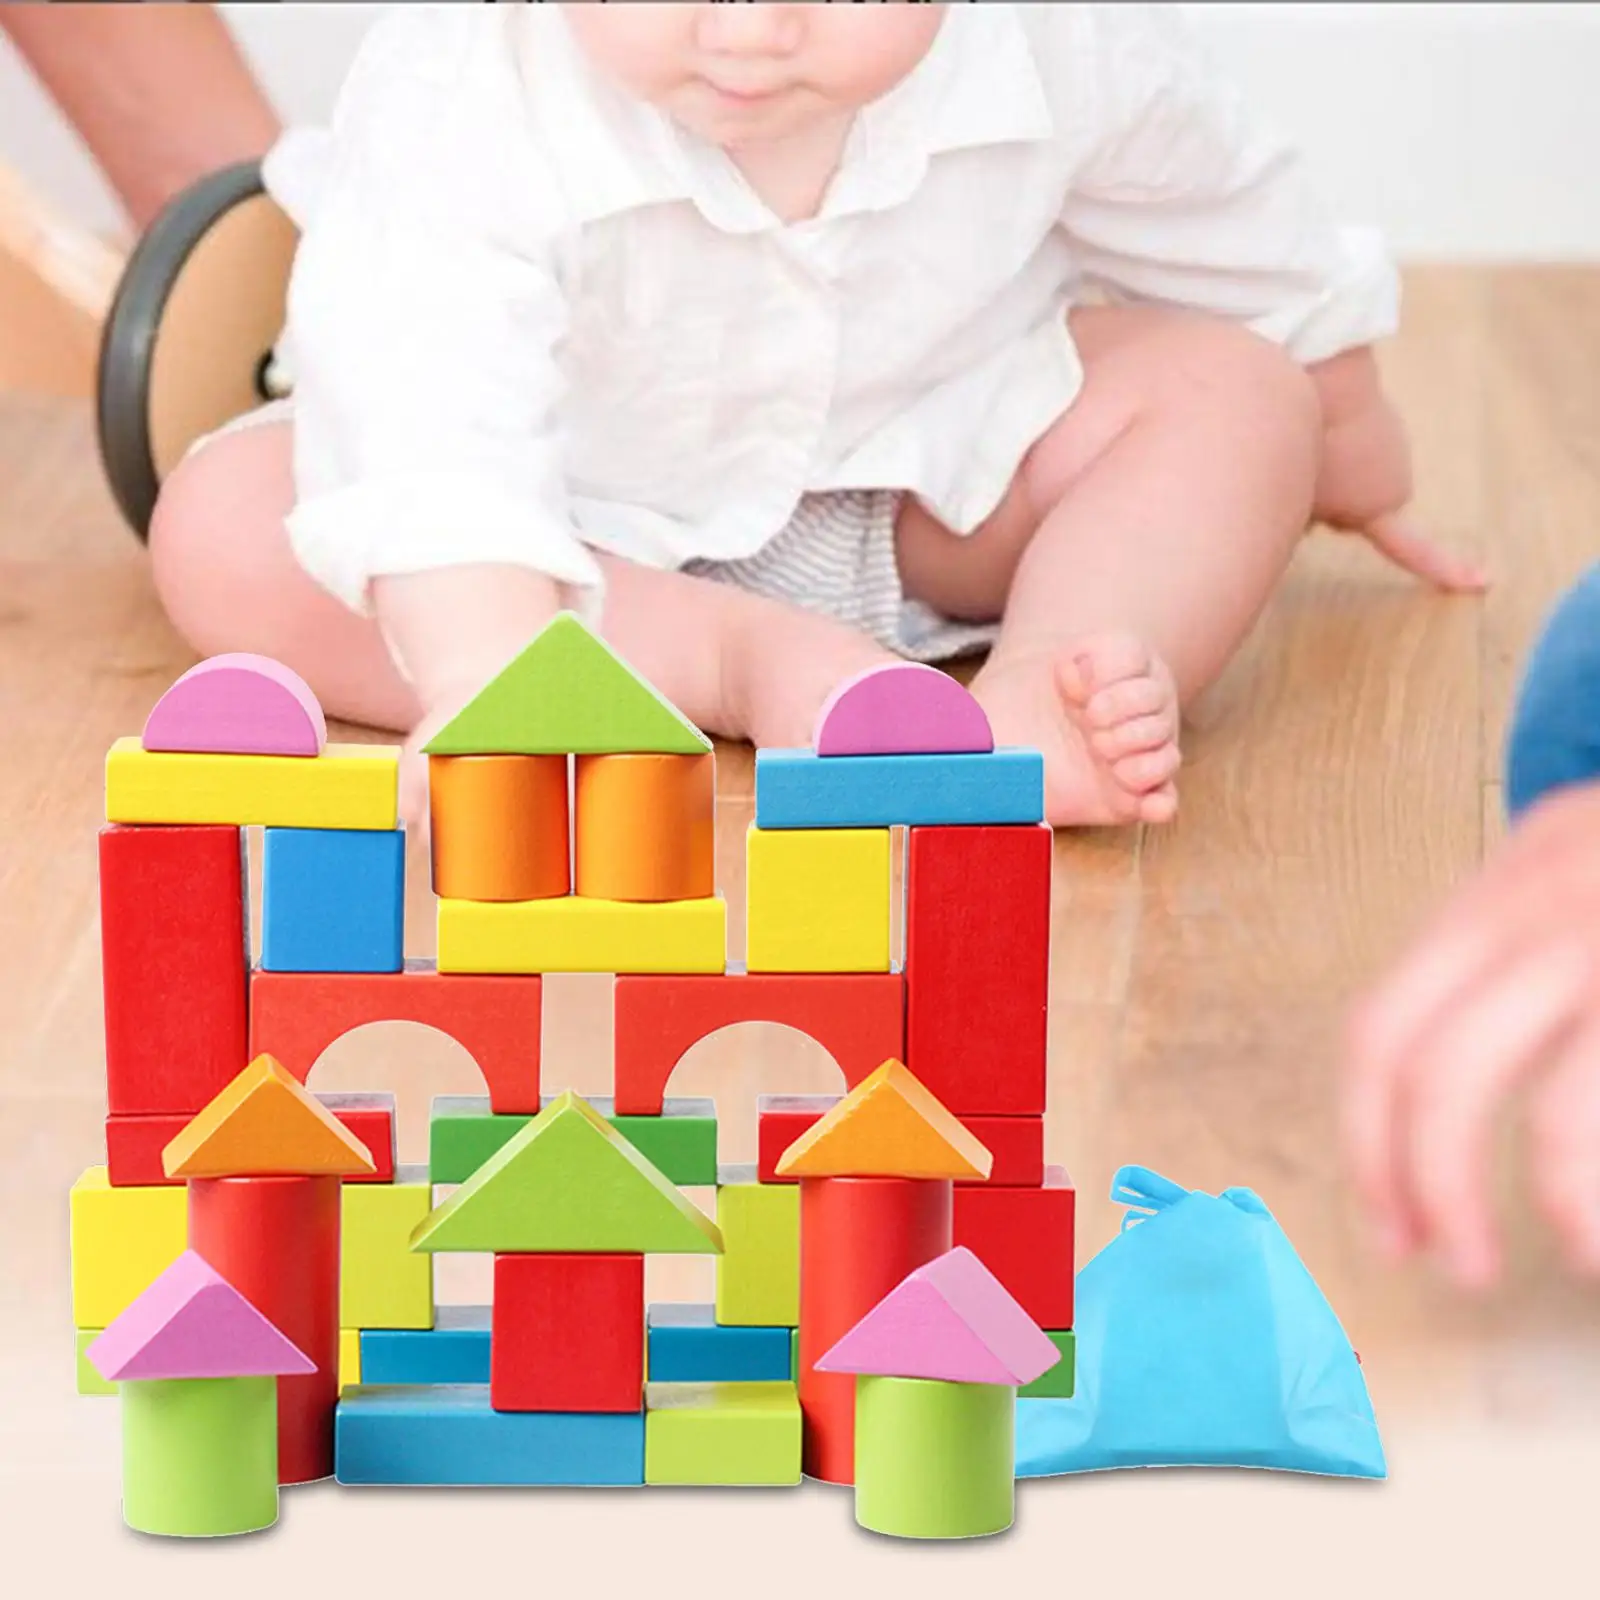 40x Wooden Building Blocks Early Educational Toys with Storage Pouch for Birthday Gifts